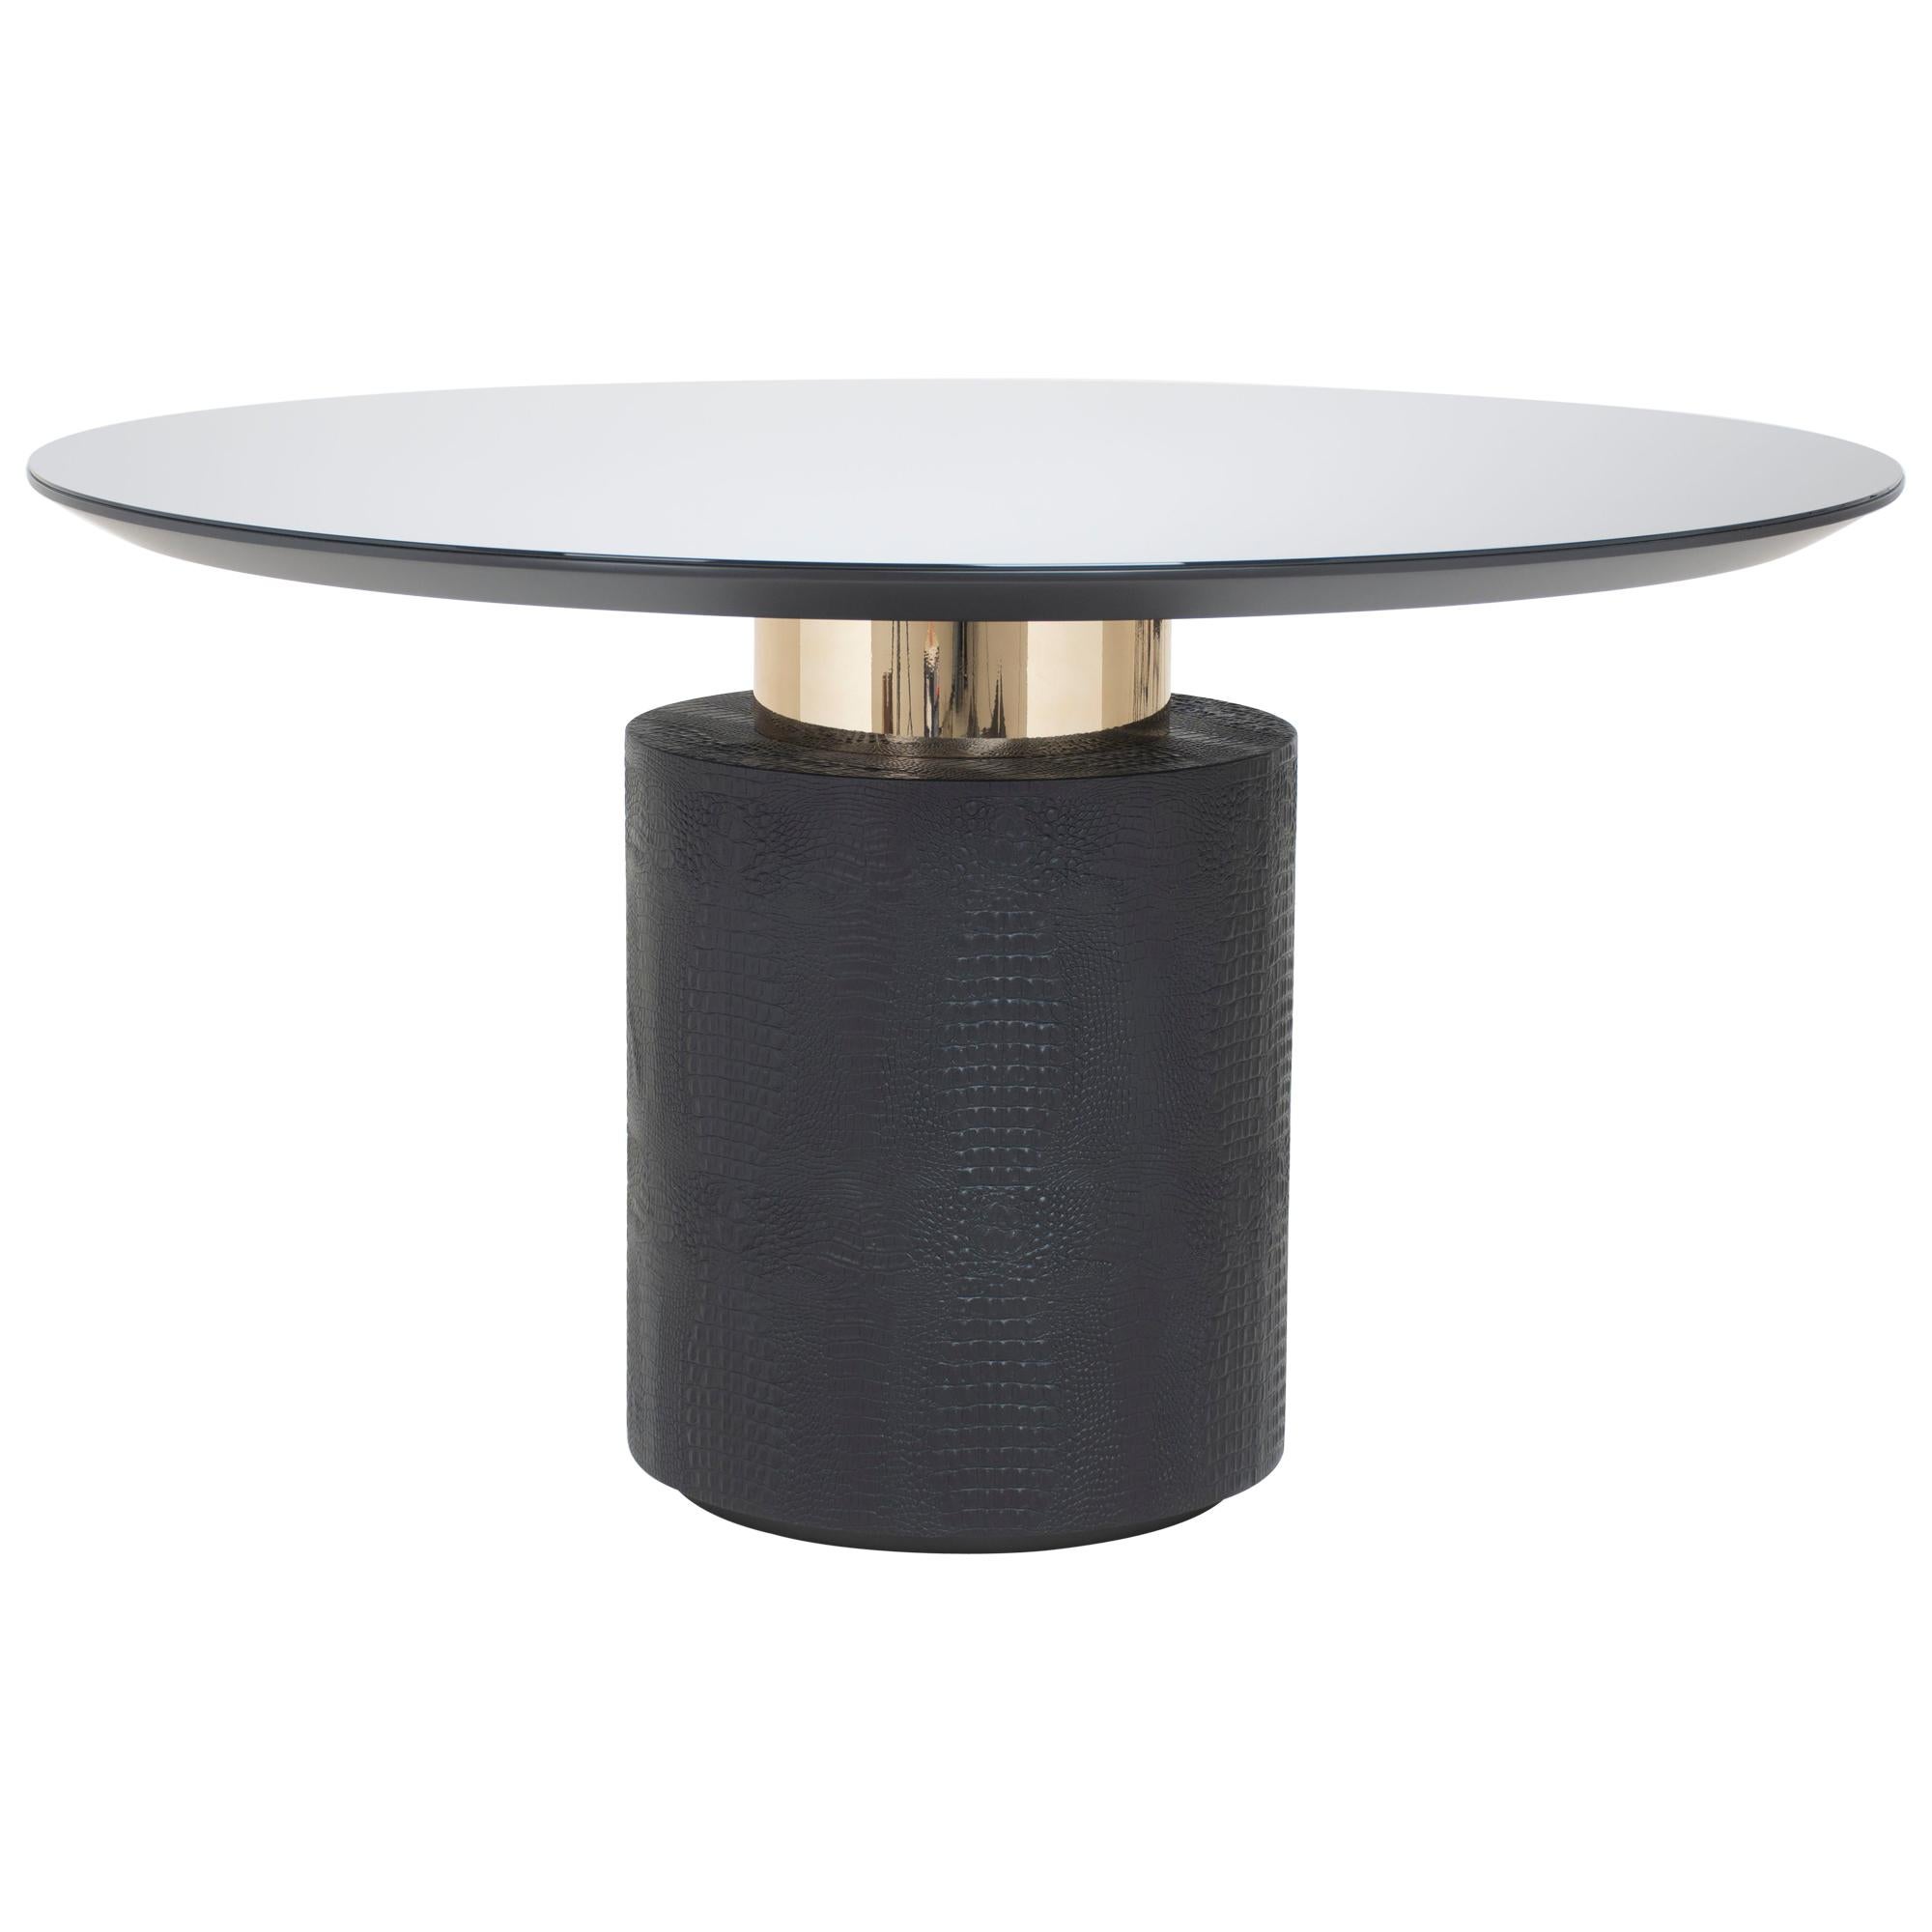 Round dining table Neruda, glass edition is a precious piece to complement your dining room. Built with high-quality material, the design speaks for itself, elegance in every detail.

Details: Top in black lacquer wood with black glass over it,